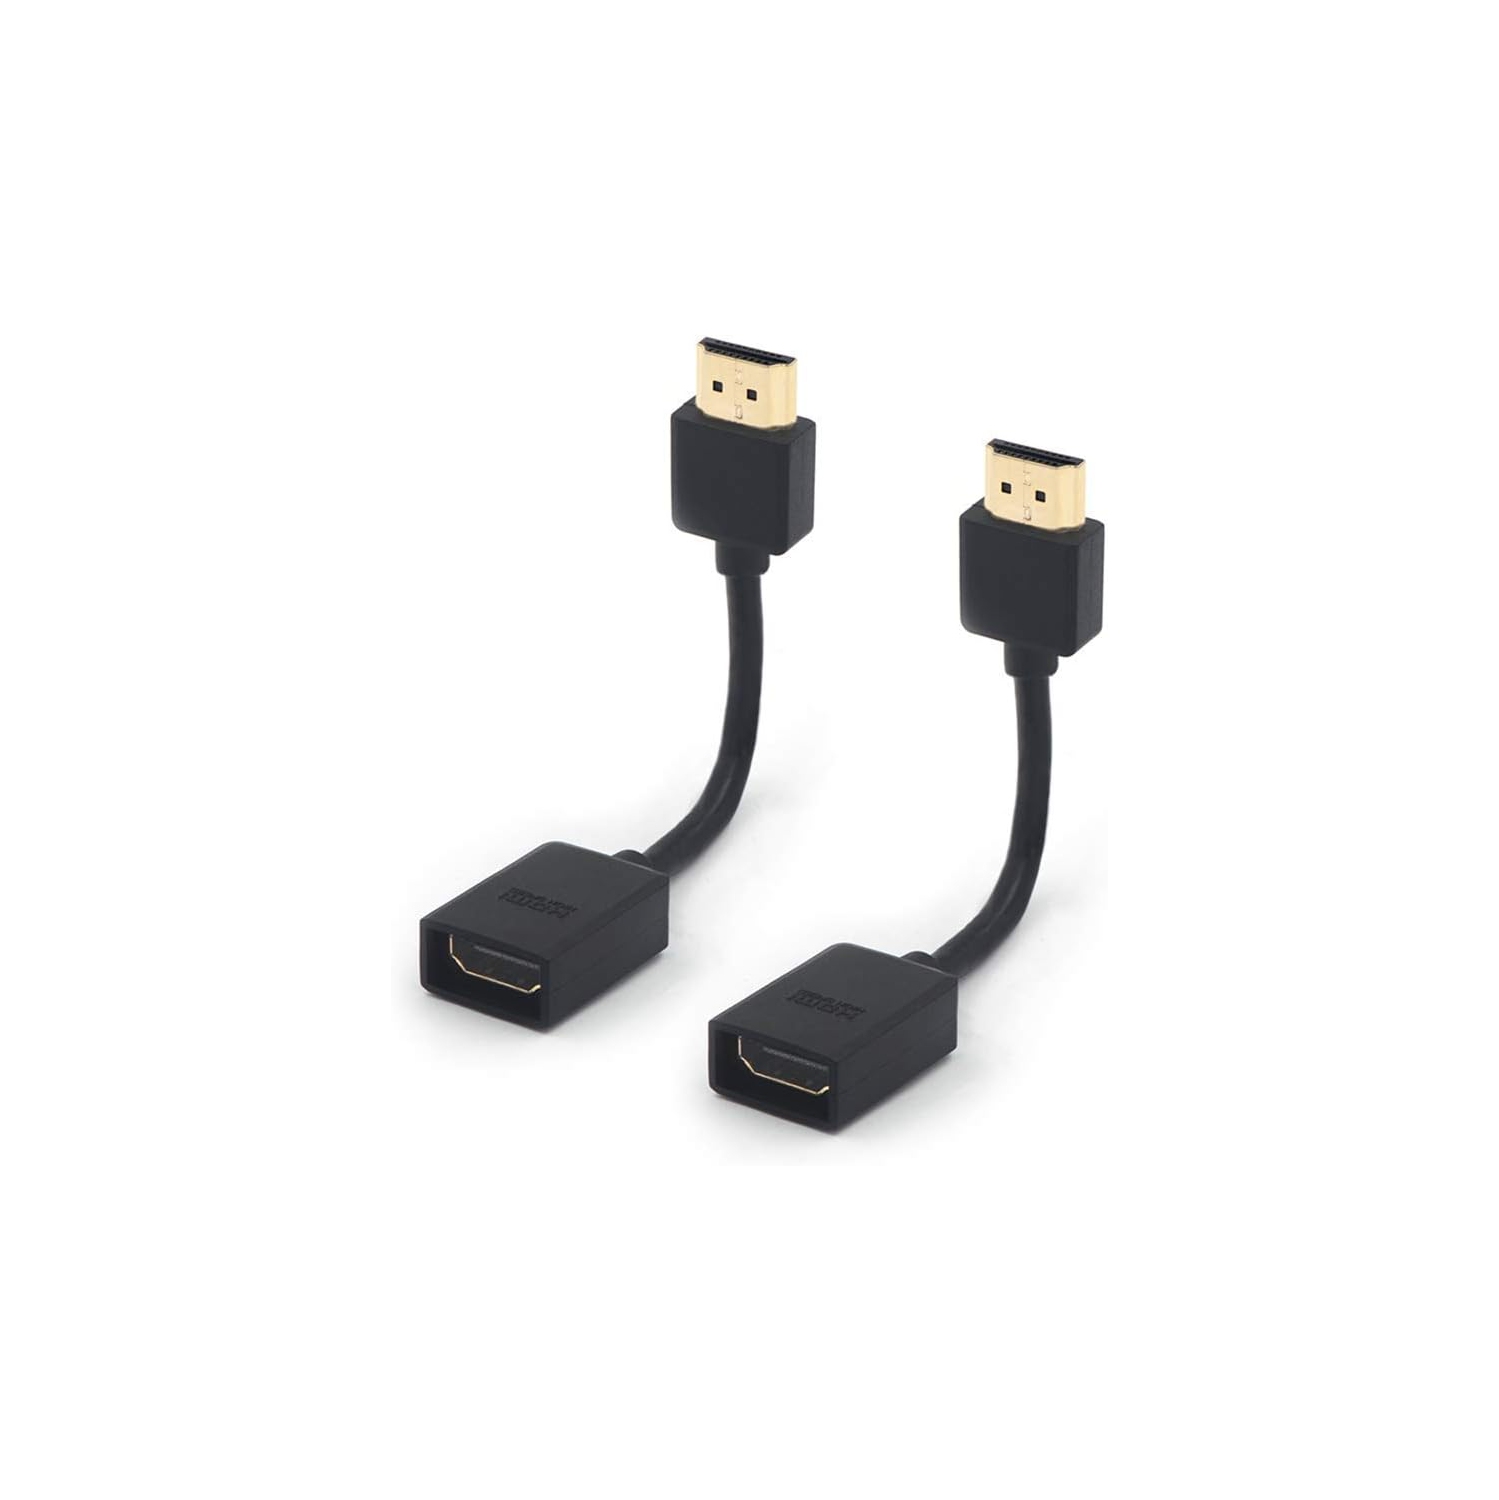 HDMI Extension Cable Male to Female Support 4K & 3D HDMI 2.0 for Roku Stick, TV Stick, Google Chrome Cast, Laptop